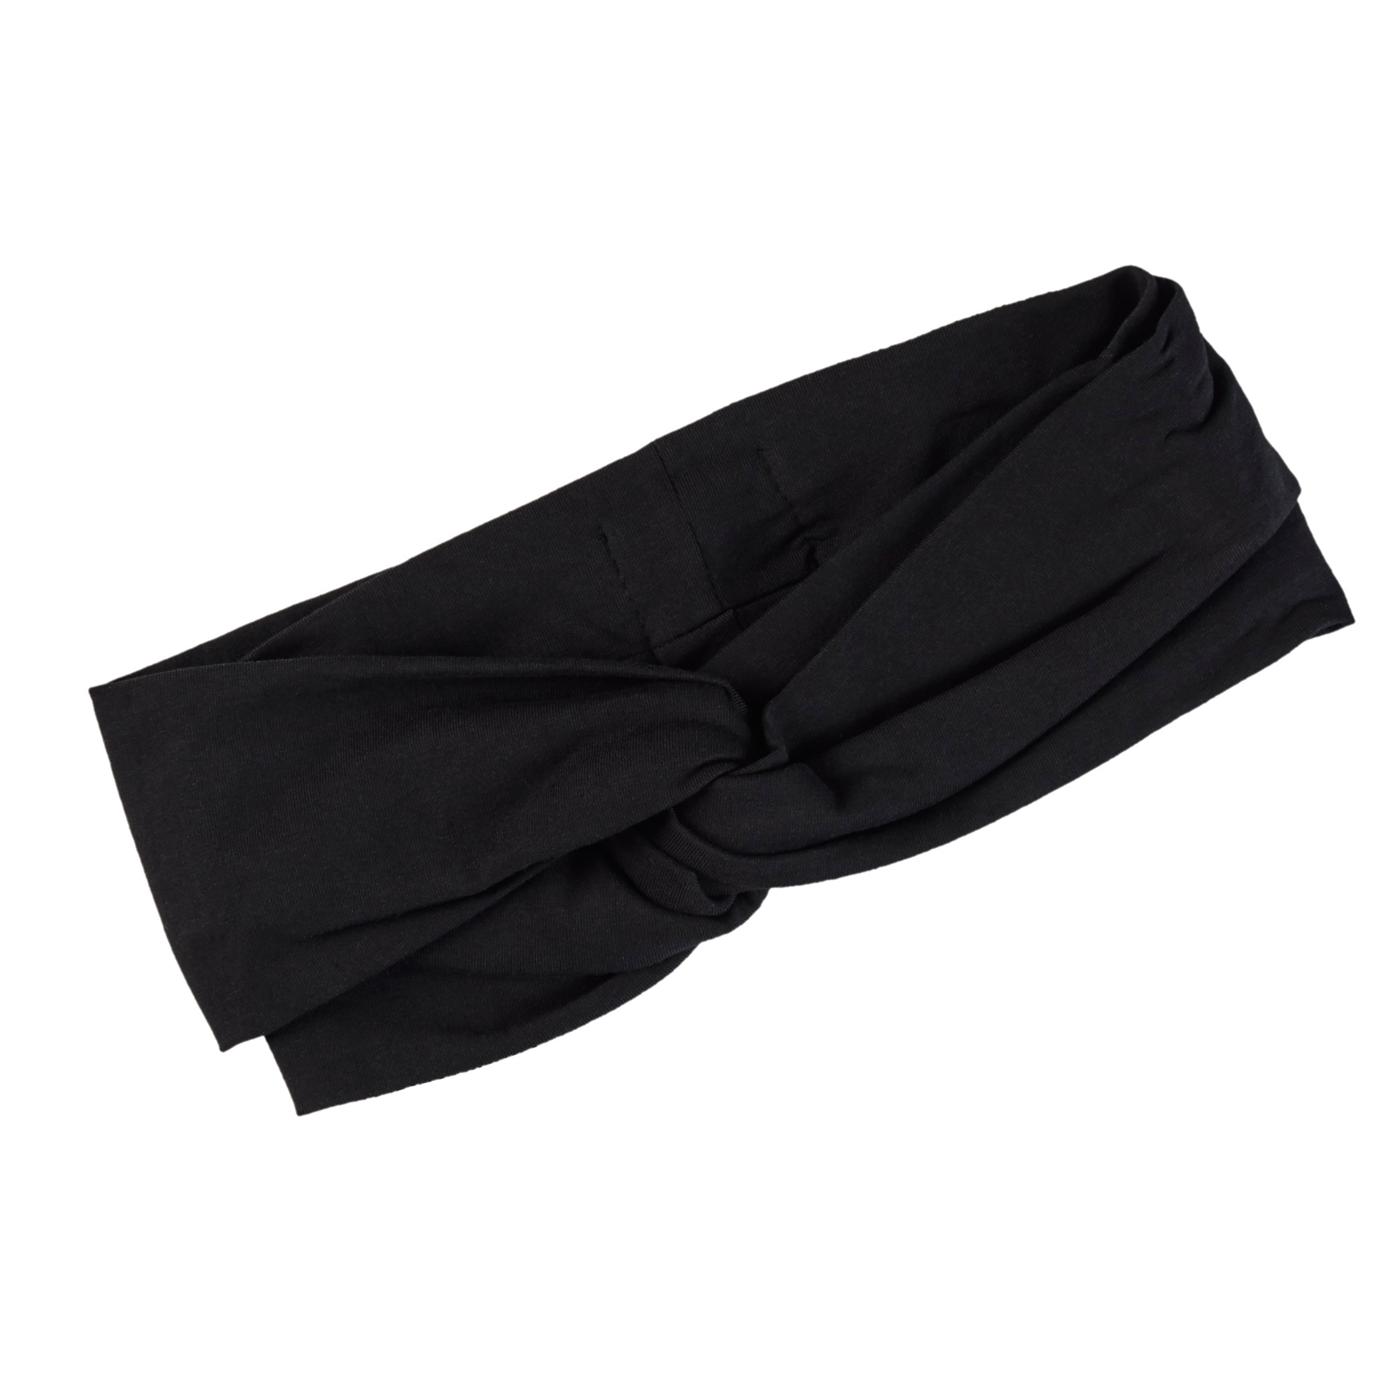 Scunci Everyday Active Wide Turban Black; image 2 of 2